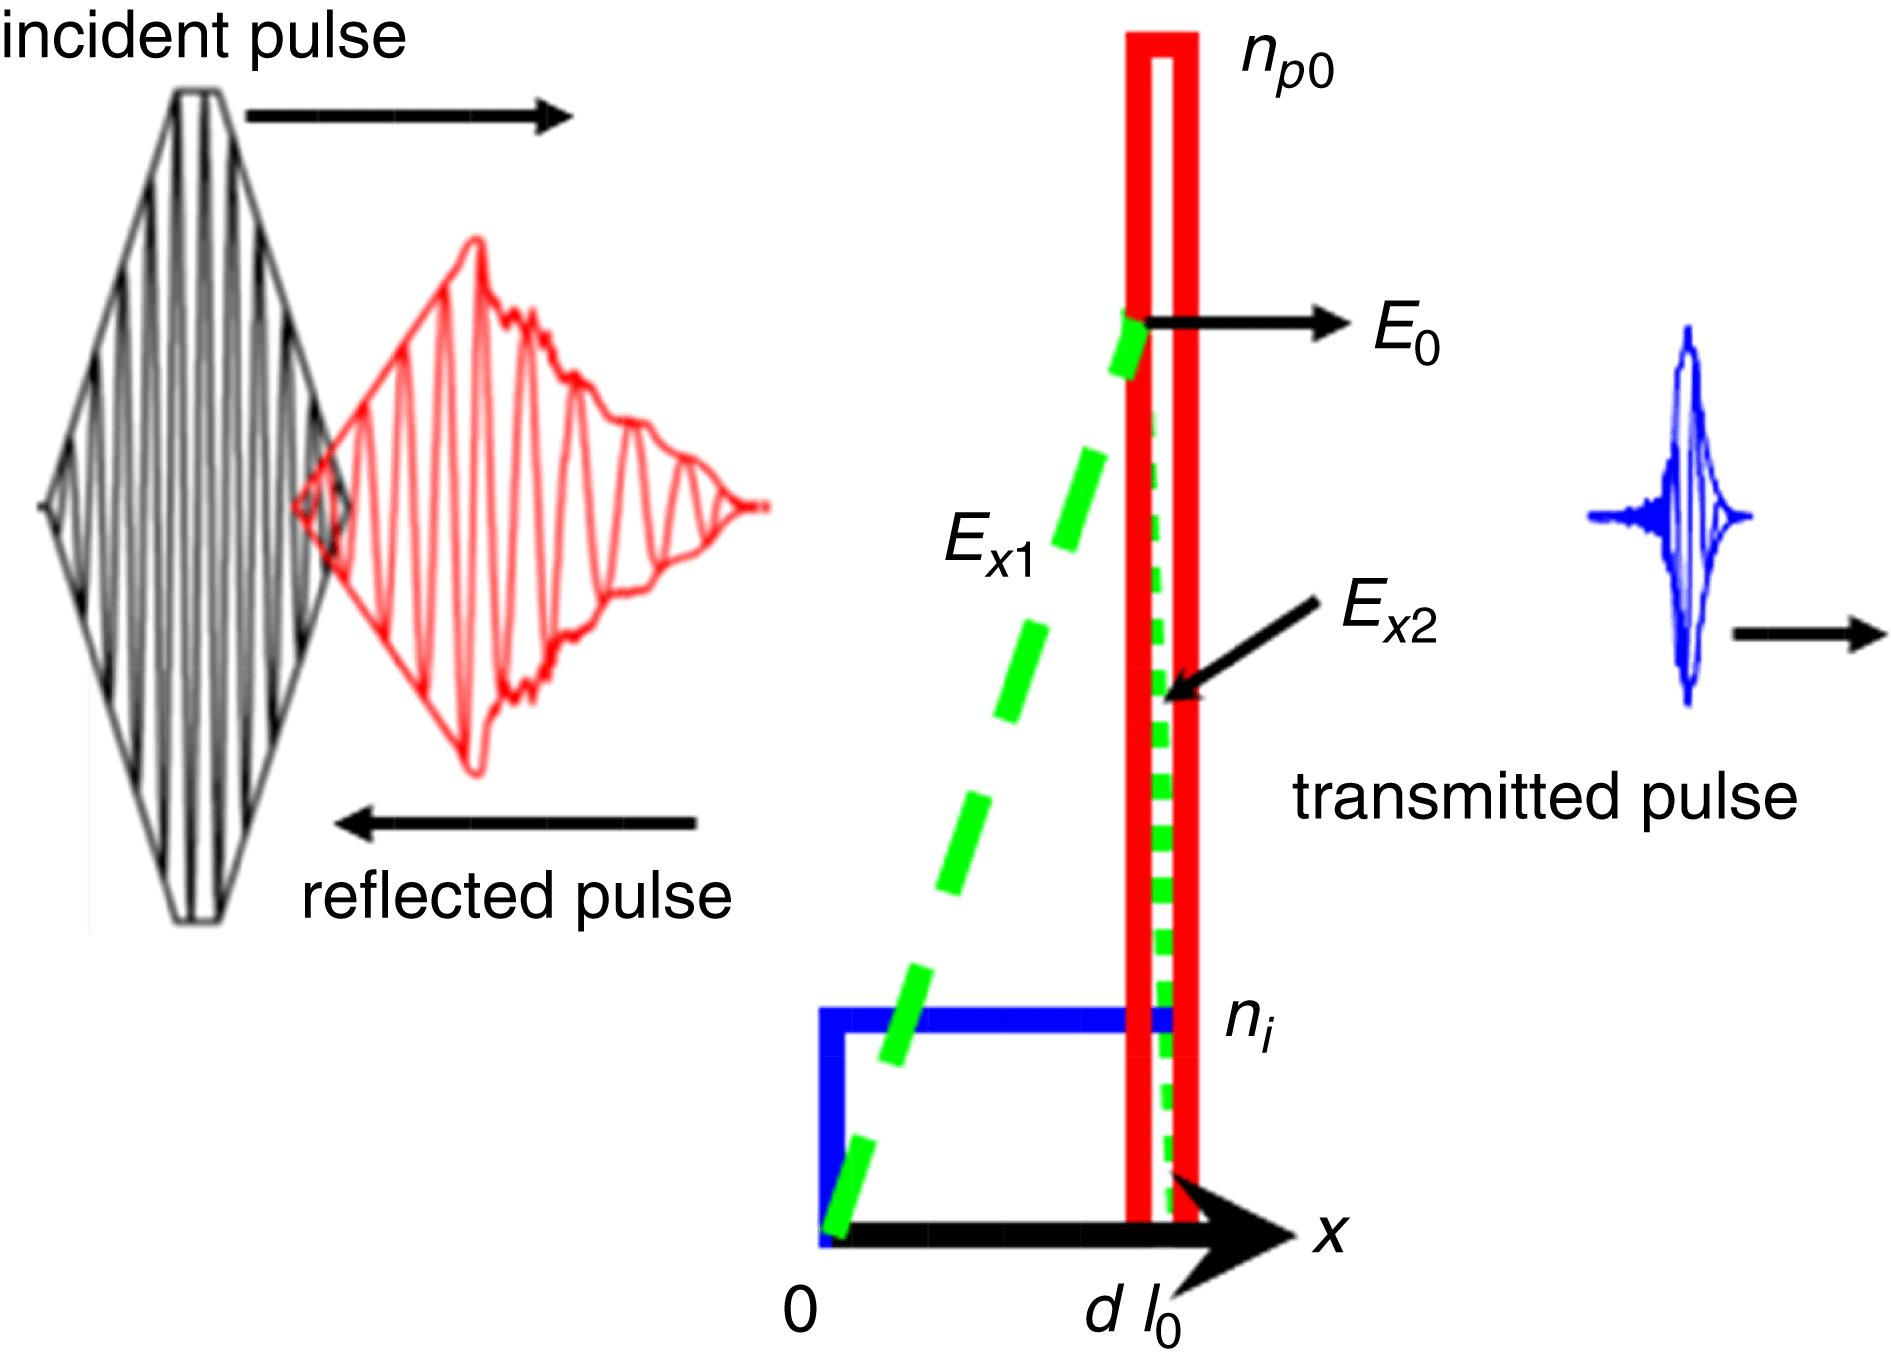 Scheme for generating nearly single-cycle laser pulses. The incident pulse irradiates a thin foil, producing an ultra-short transmitted pulse and a reflected pulse. Electrostatic fields (green dashed line) and (green dotted line) are produced at both sides of the surface (at ) of the CEL (red solid line) at the initial stage of the interaction. Ions (blue solid line) remain at rest. The distribution of the electrons corresponds to the case where the CEL just reaches the back side of the target. The CEL then oscillates and disperses, as shown in Figures 2c and 2d.